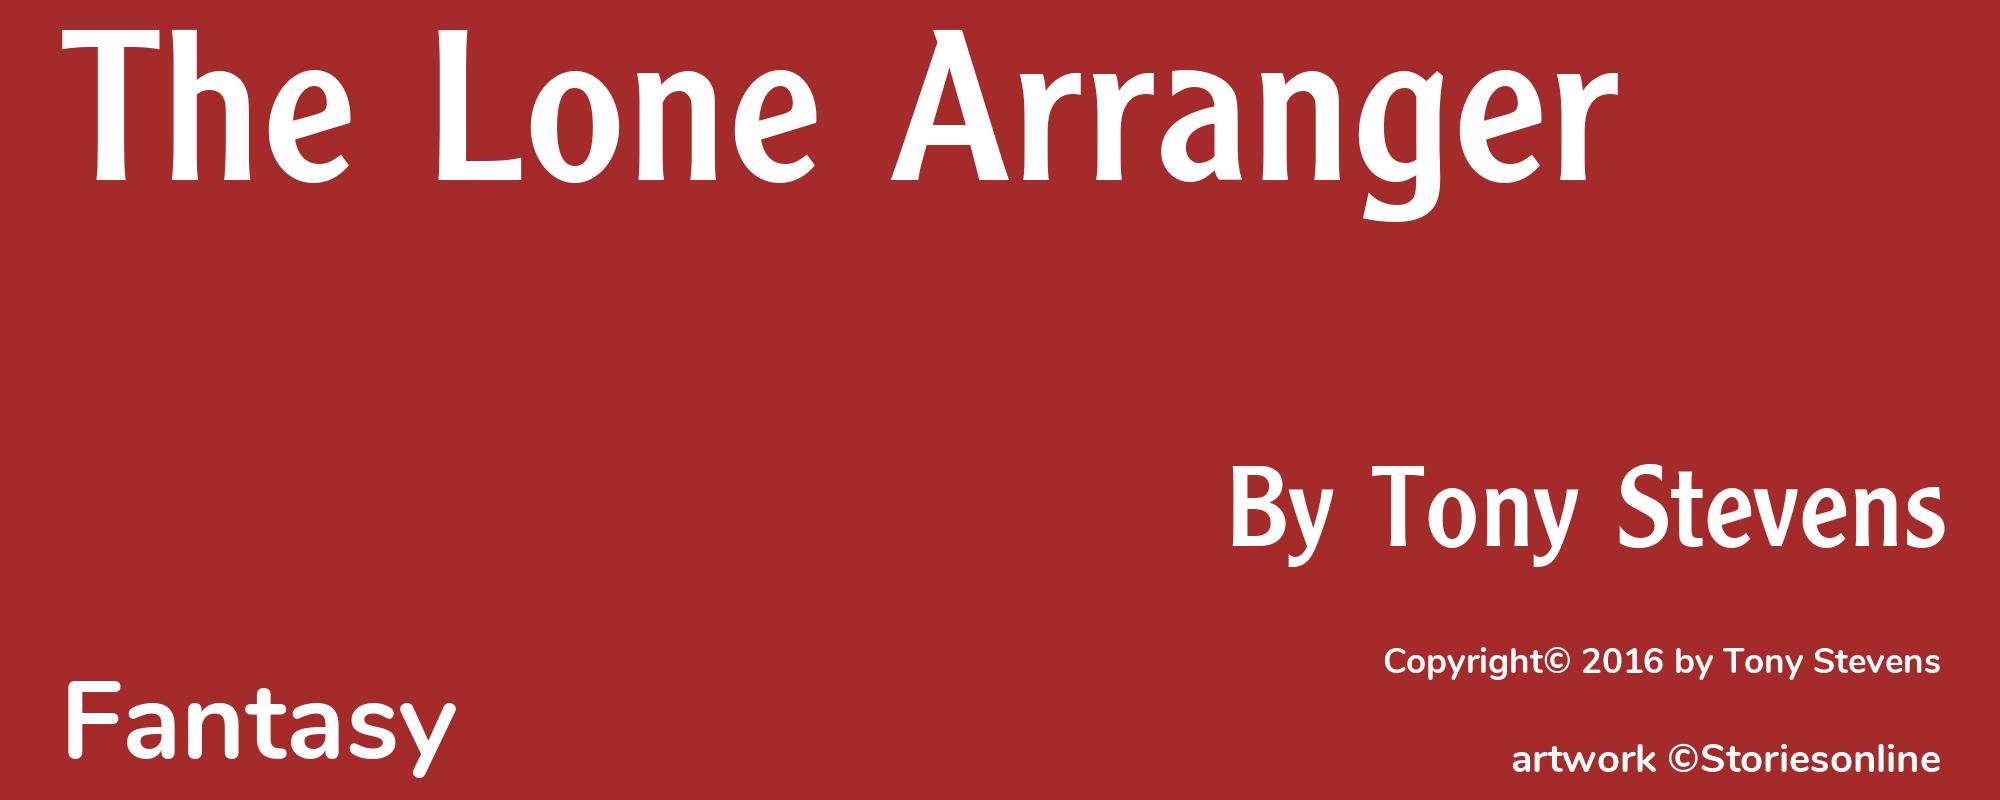 The Lone Arranger - Cover